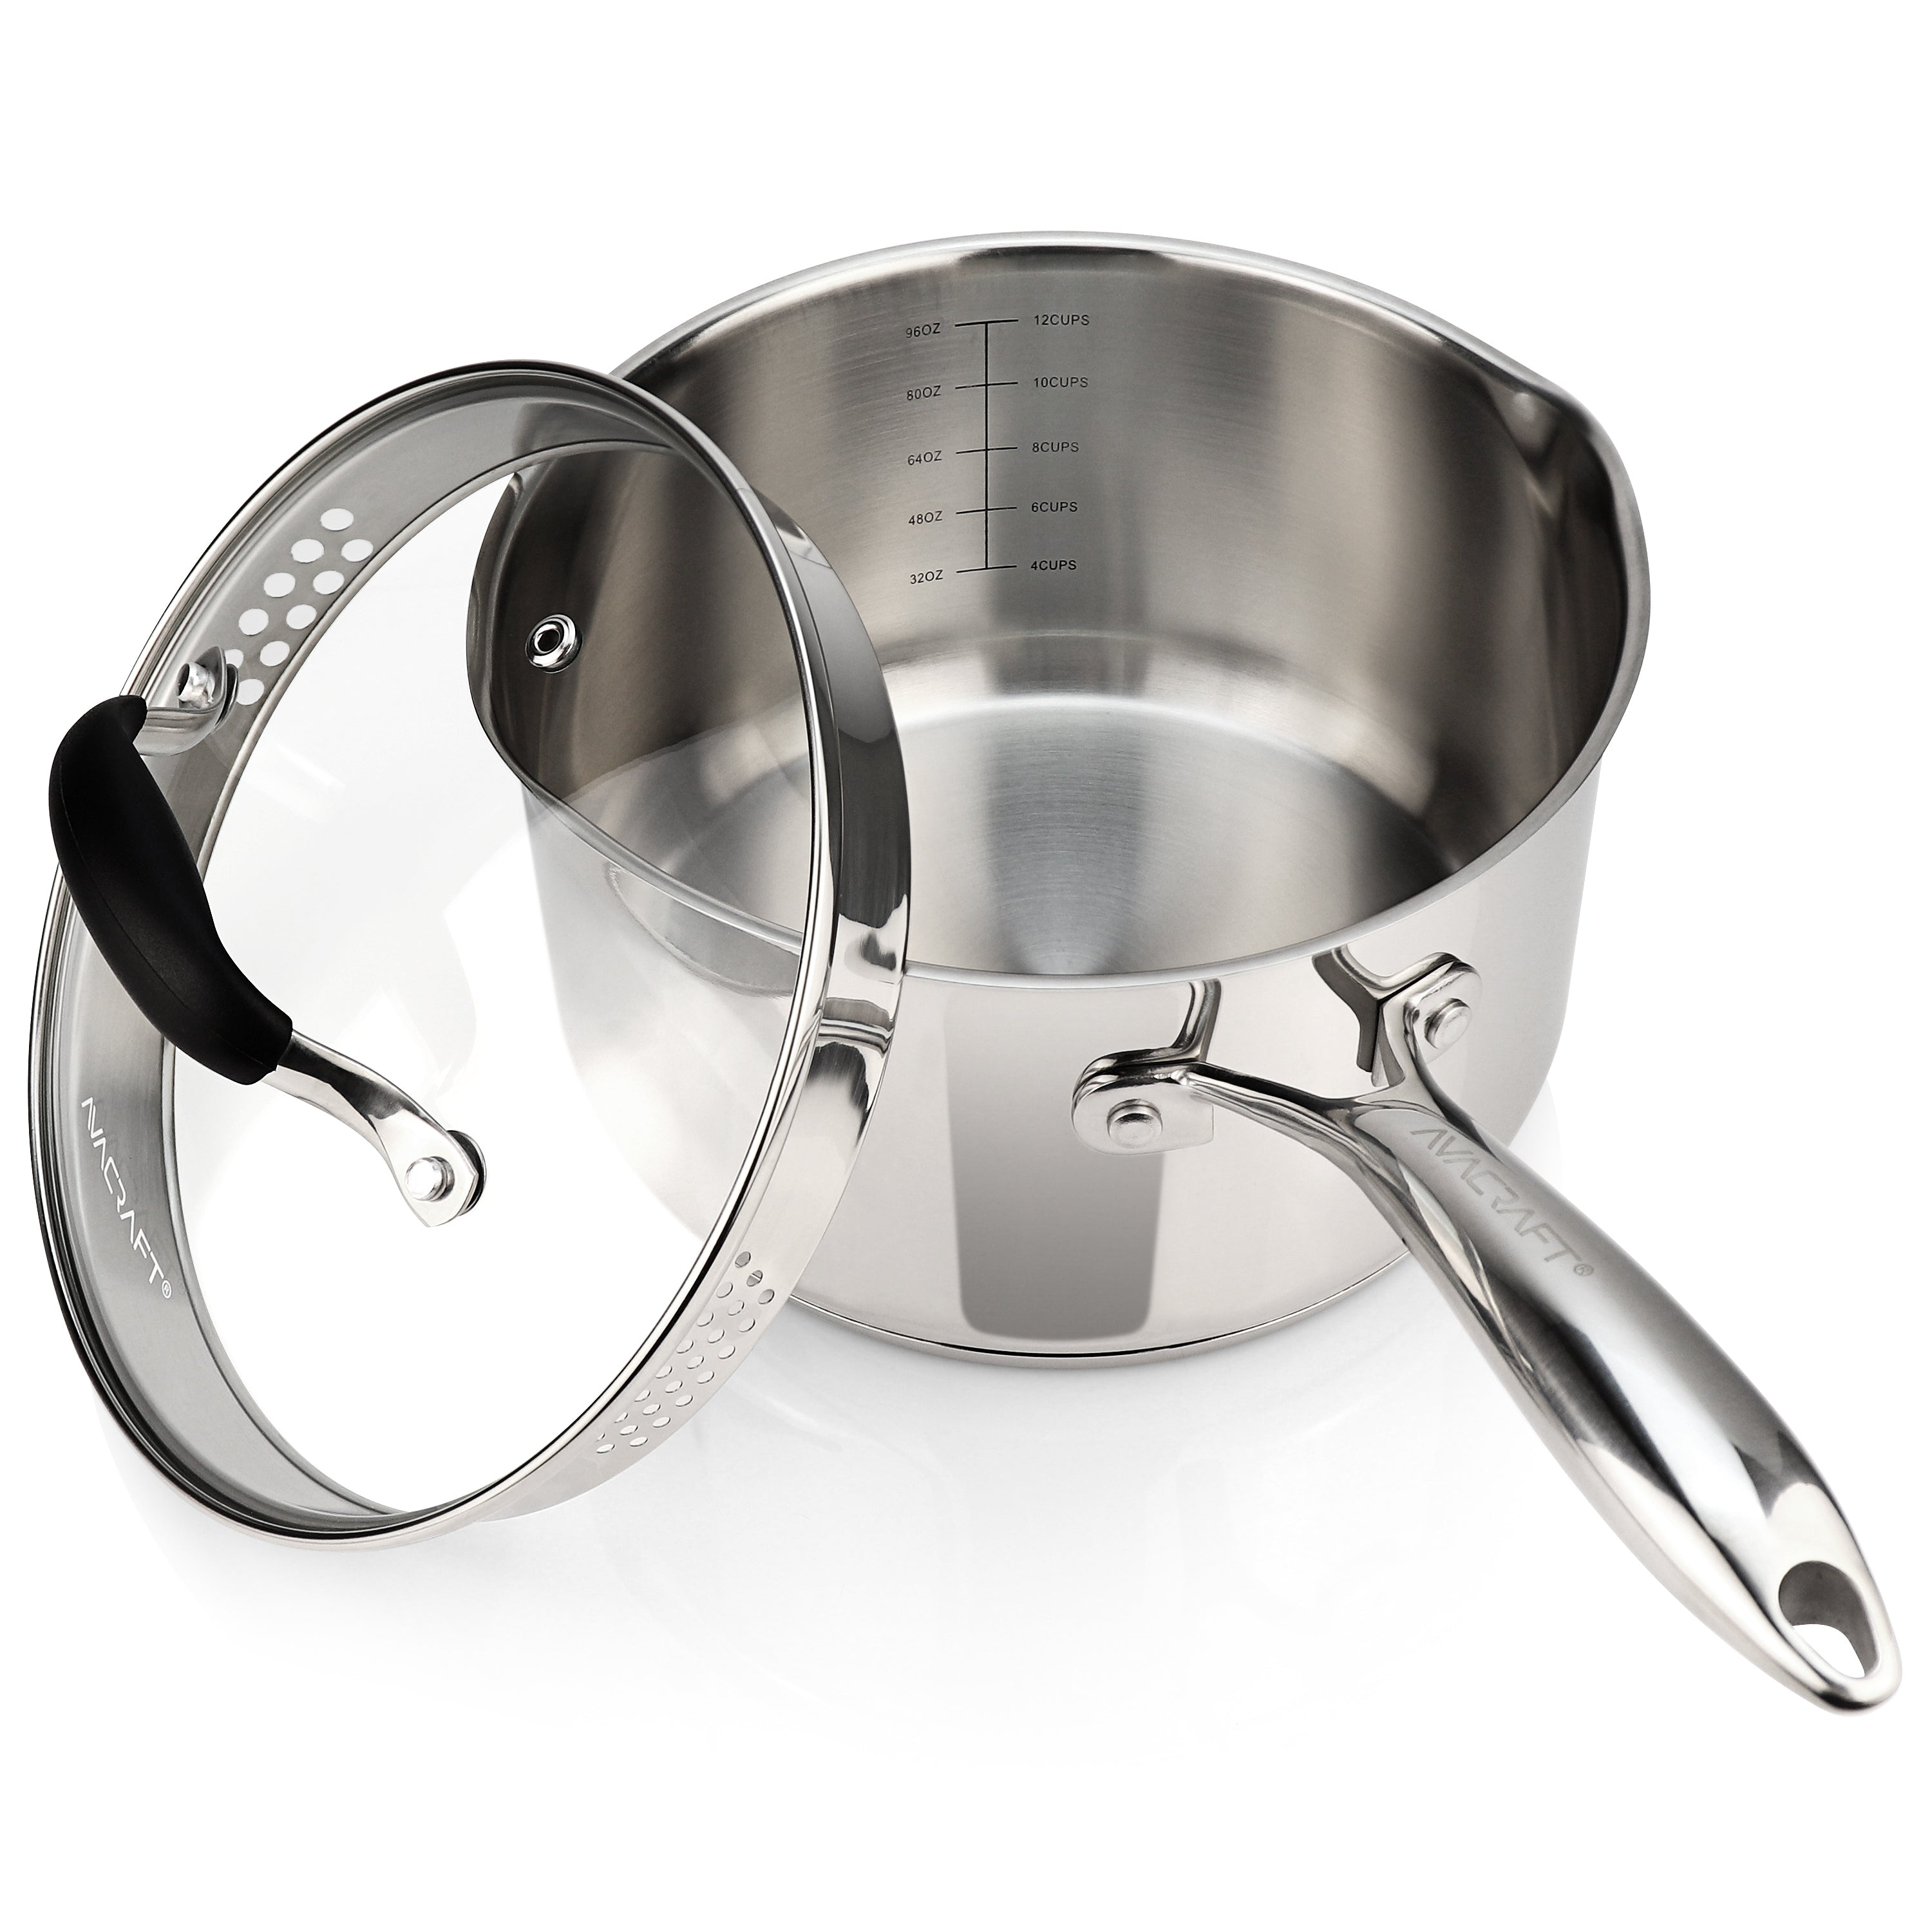 Performa 3 Qt. Stainless Steel Covered Saucepan - McCabe Do it Center